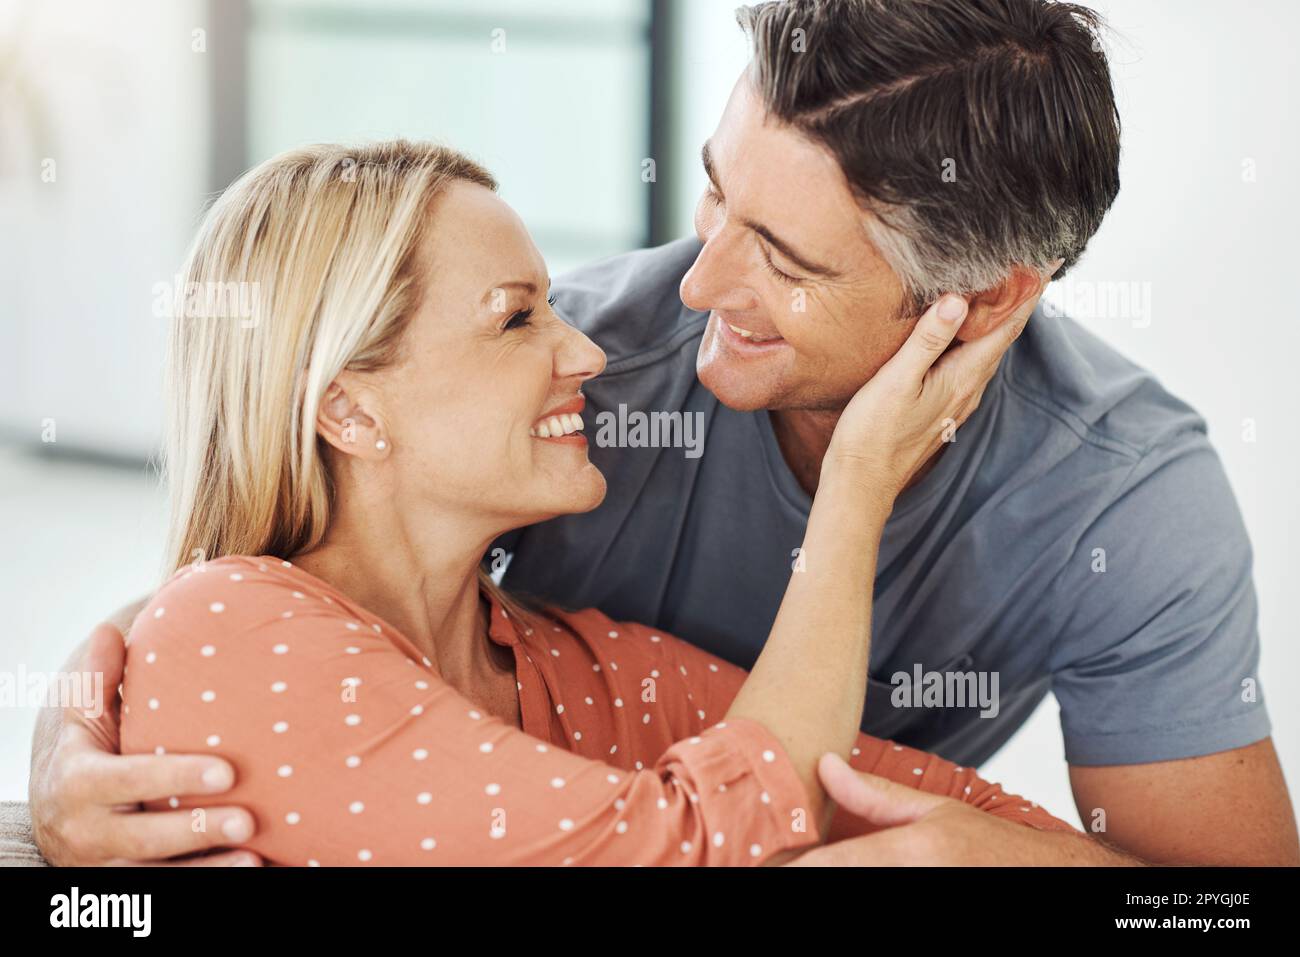 Couples intimate hi-res stock photography and images image